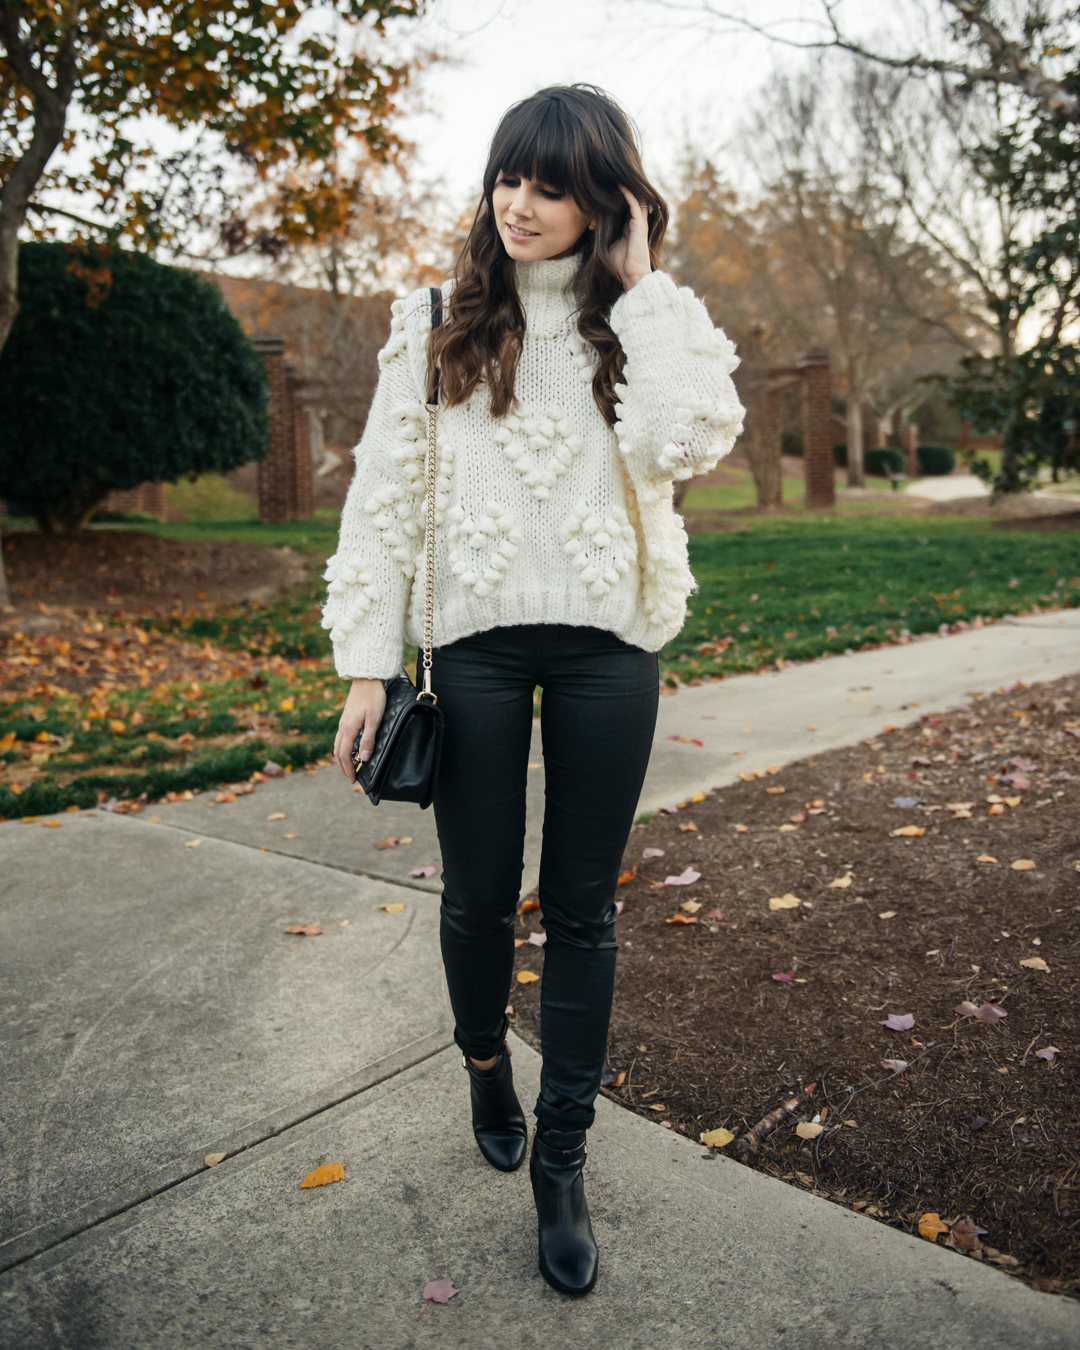 Winter style featuring Chicwish sweater and Rebecca Minkoff purse